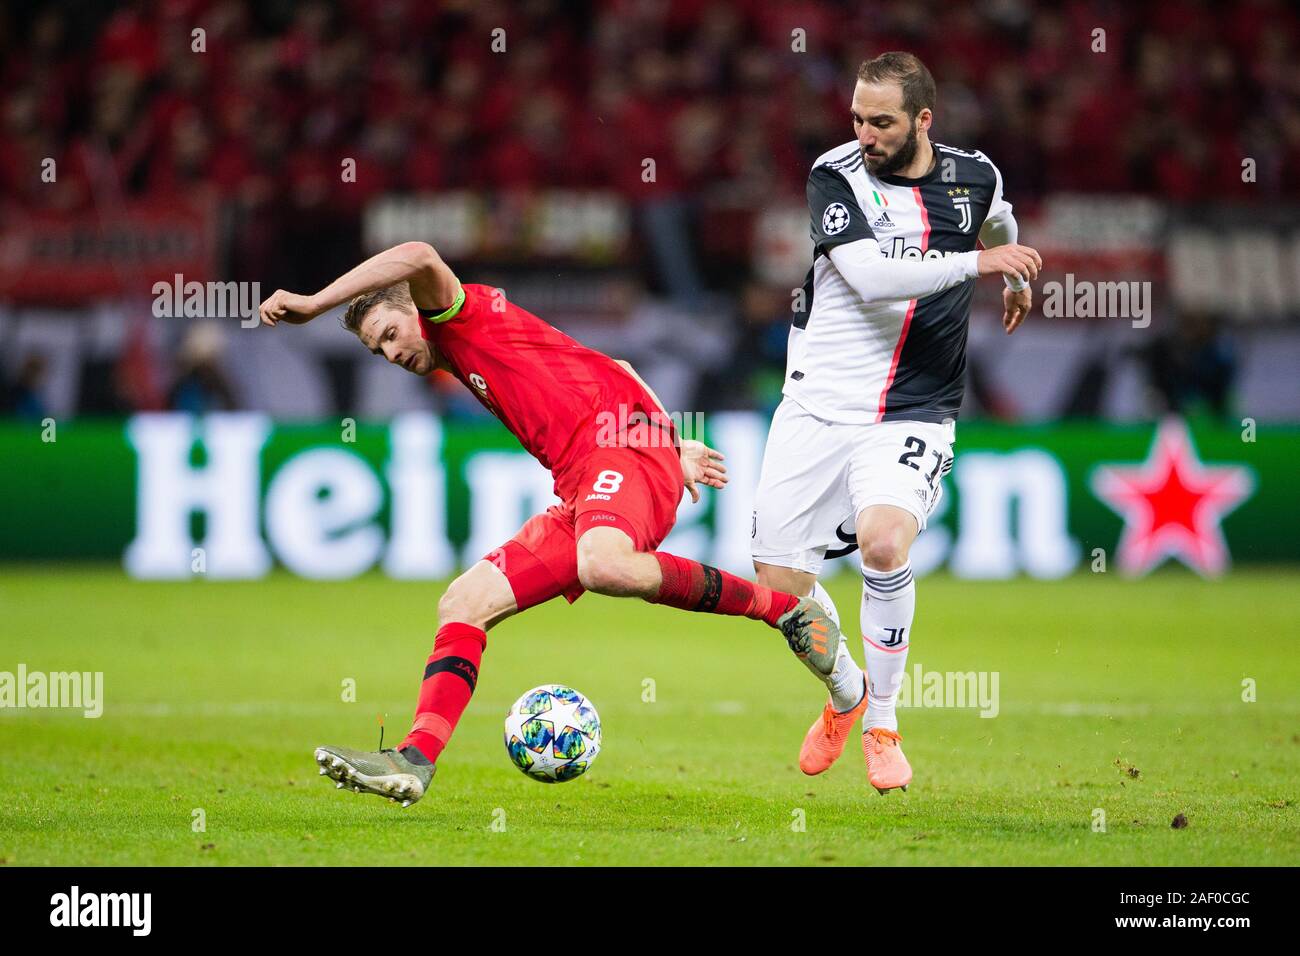 Leverkusen, Germany. 11th Dec, 2019. Soccer: Champions League, Bayer Leverkusen - Juventus Turin, Group stage, Group D, 6th matchday. Leverkusens Lars Bender (l) and Turins Gonzalo Higuain try to get the ball. Credit: Rolf Vennenbernd/dpa/Alamy Live News Stock Photo